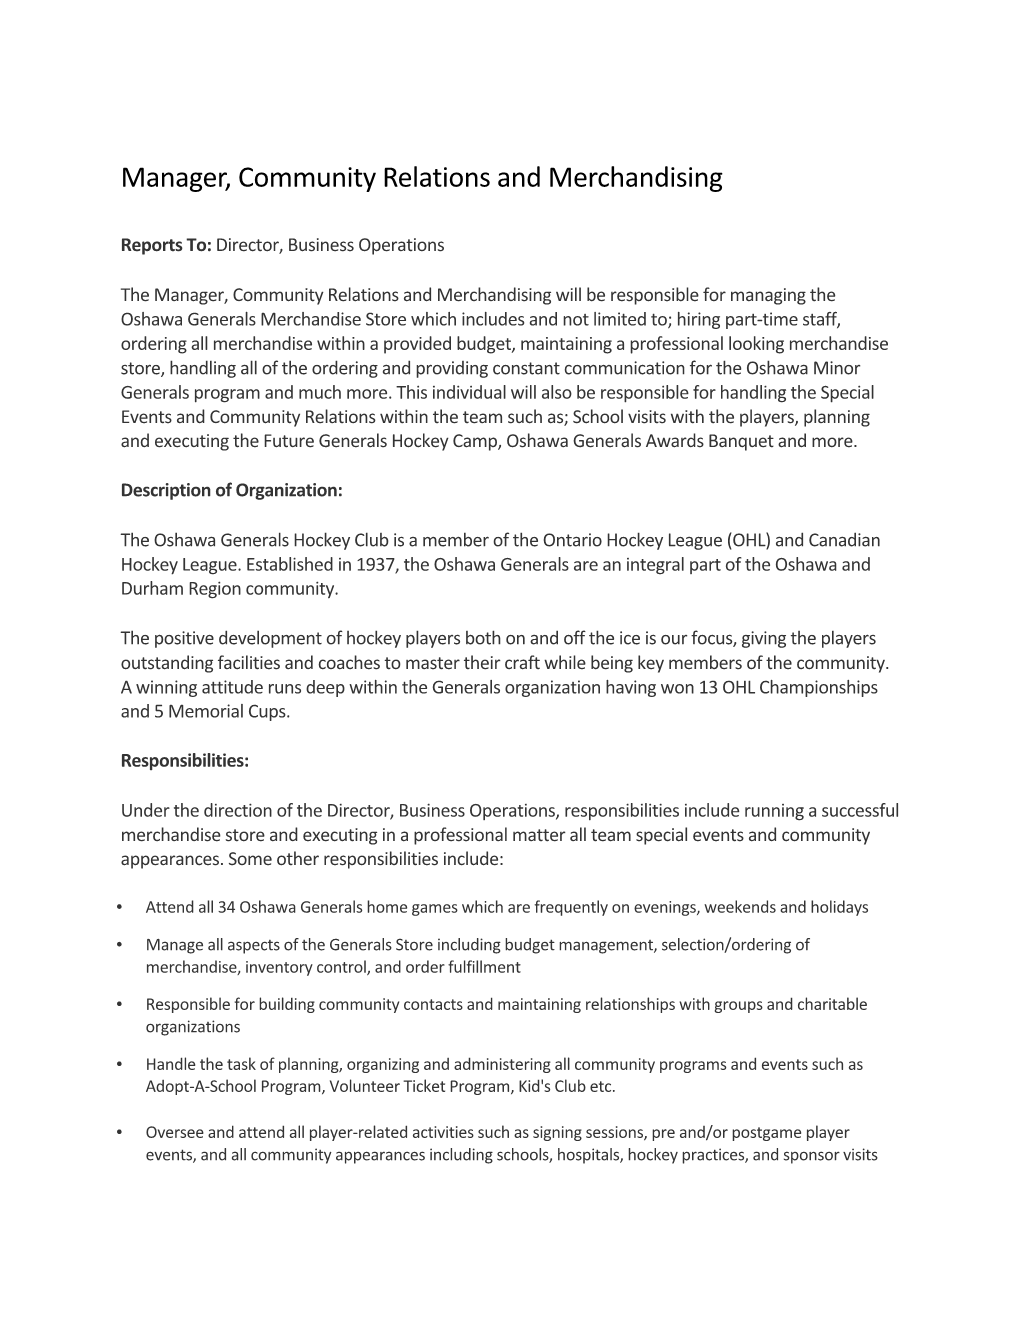 Manager, Community Relations and Merchandising